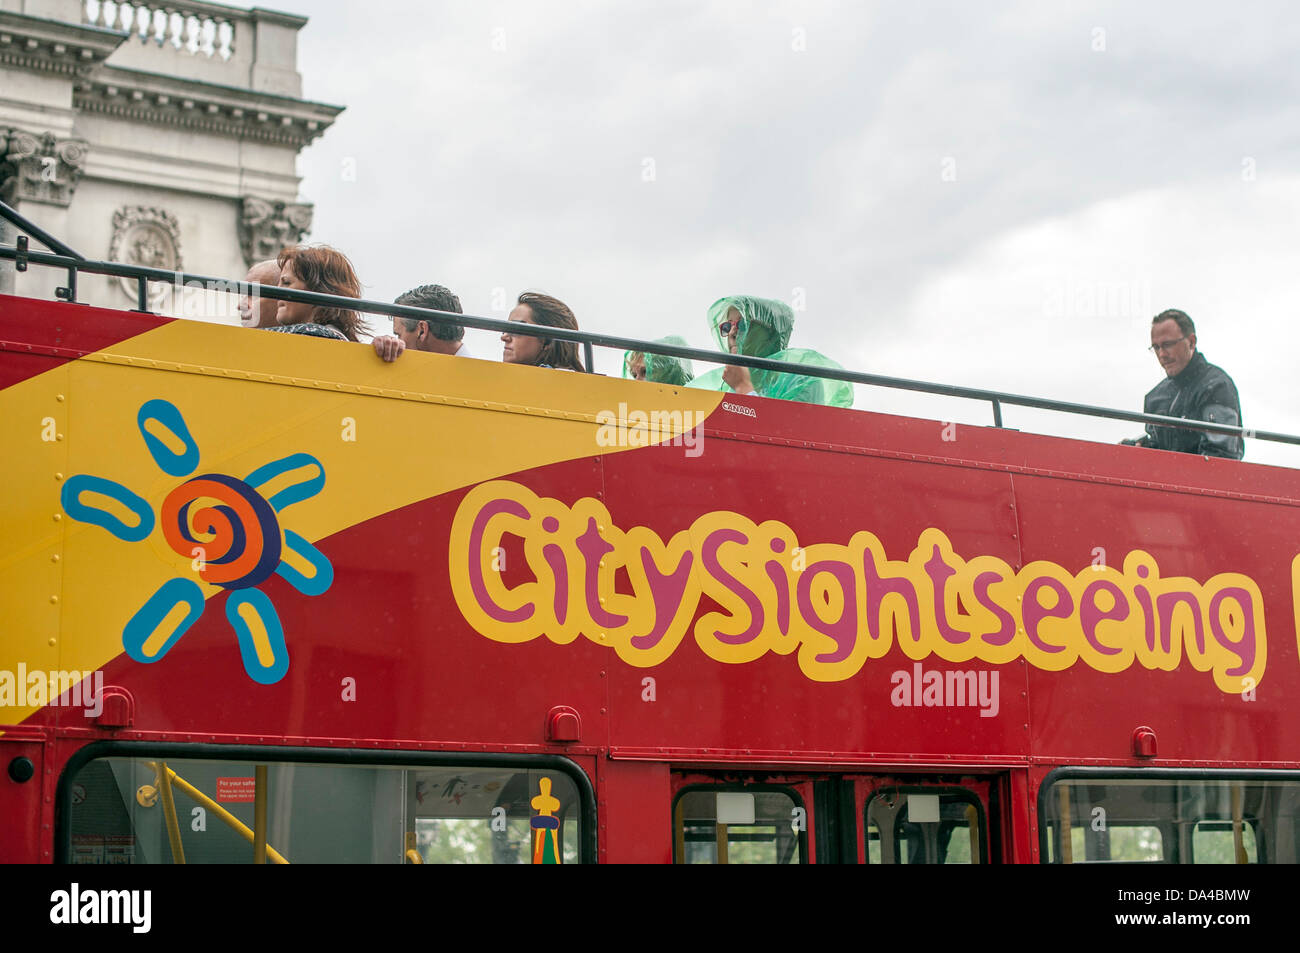 City sightseeing bus tour in rain in London Stock Photo